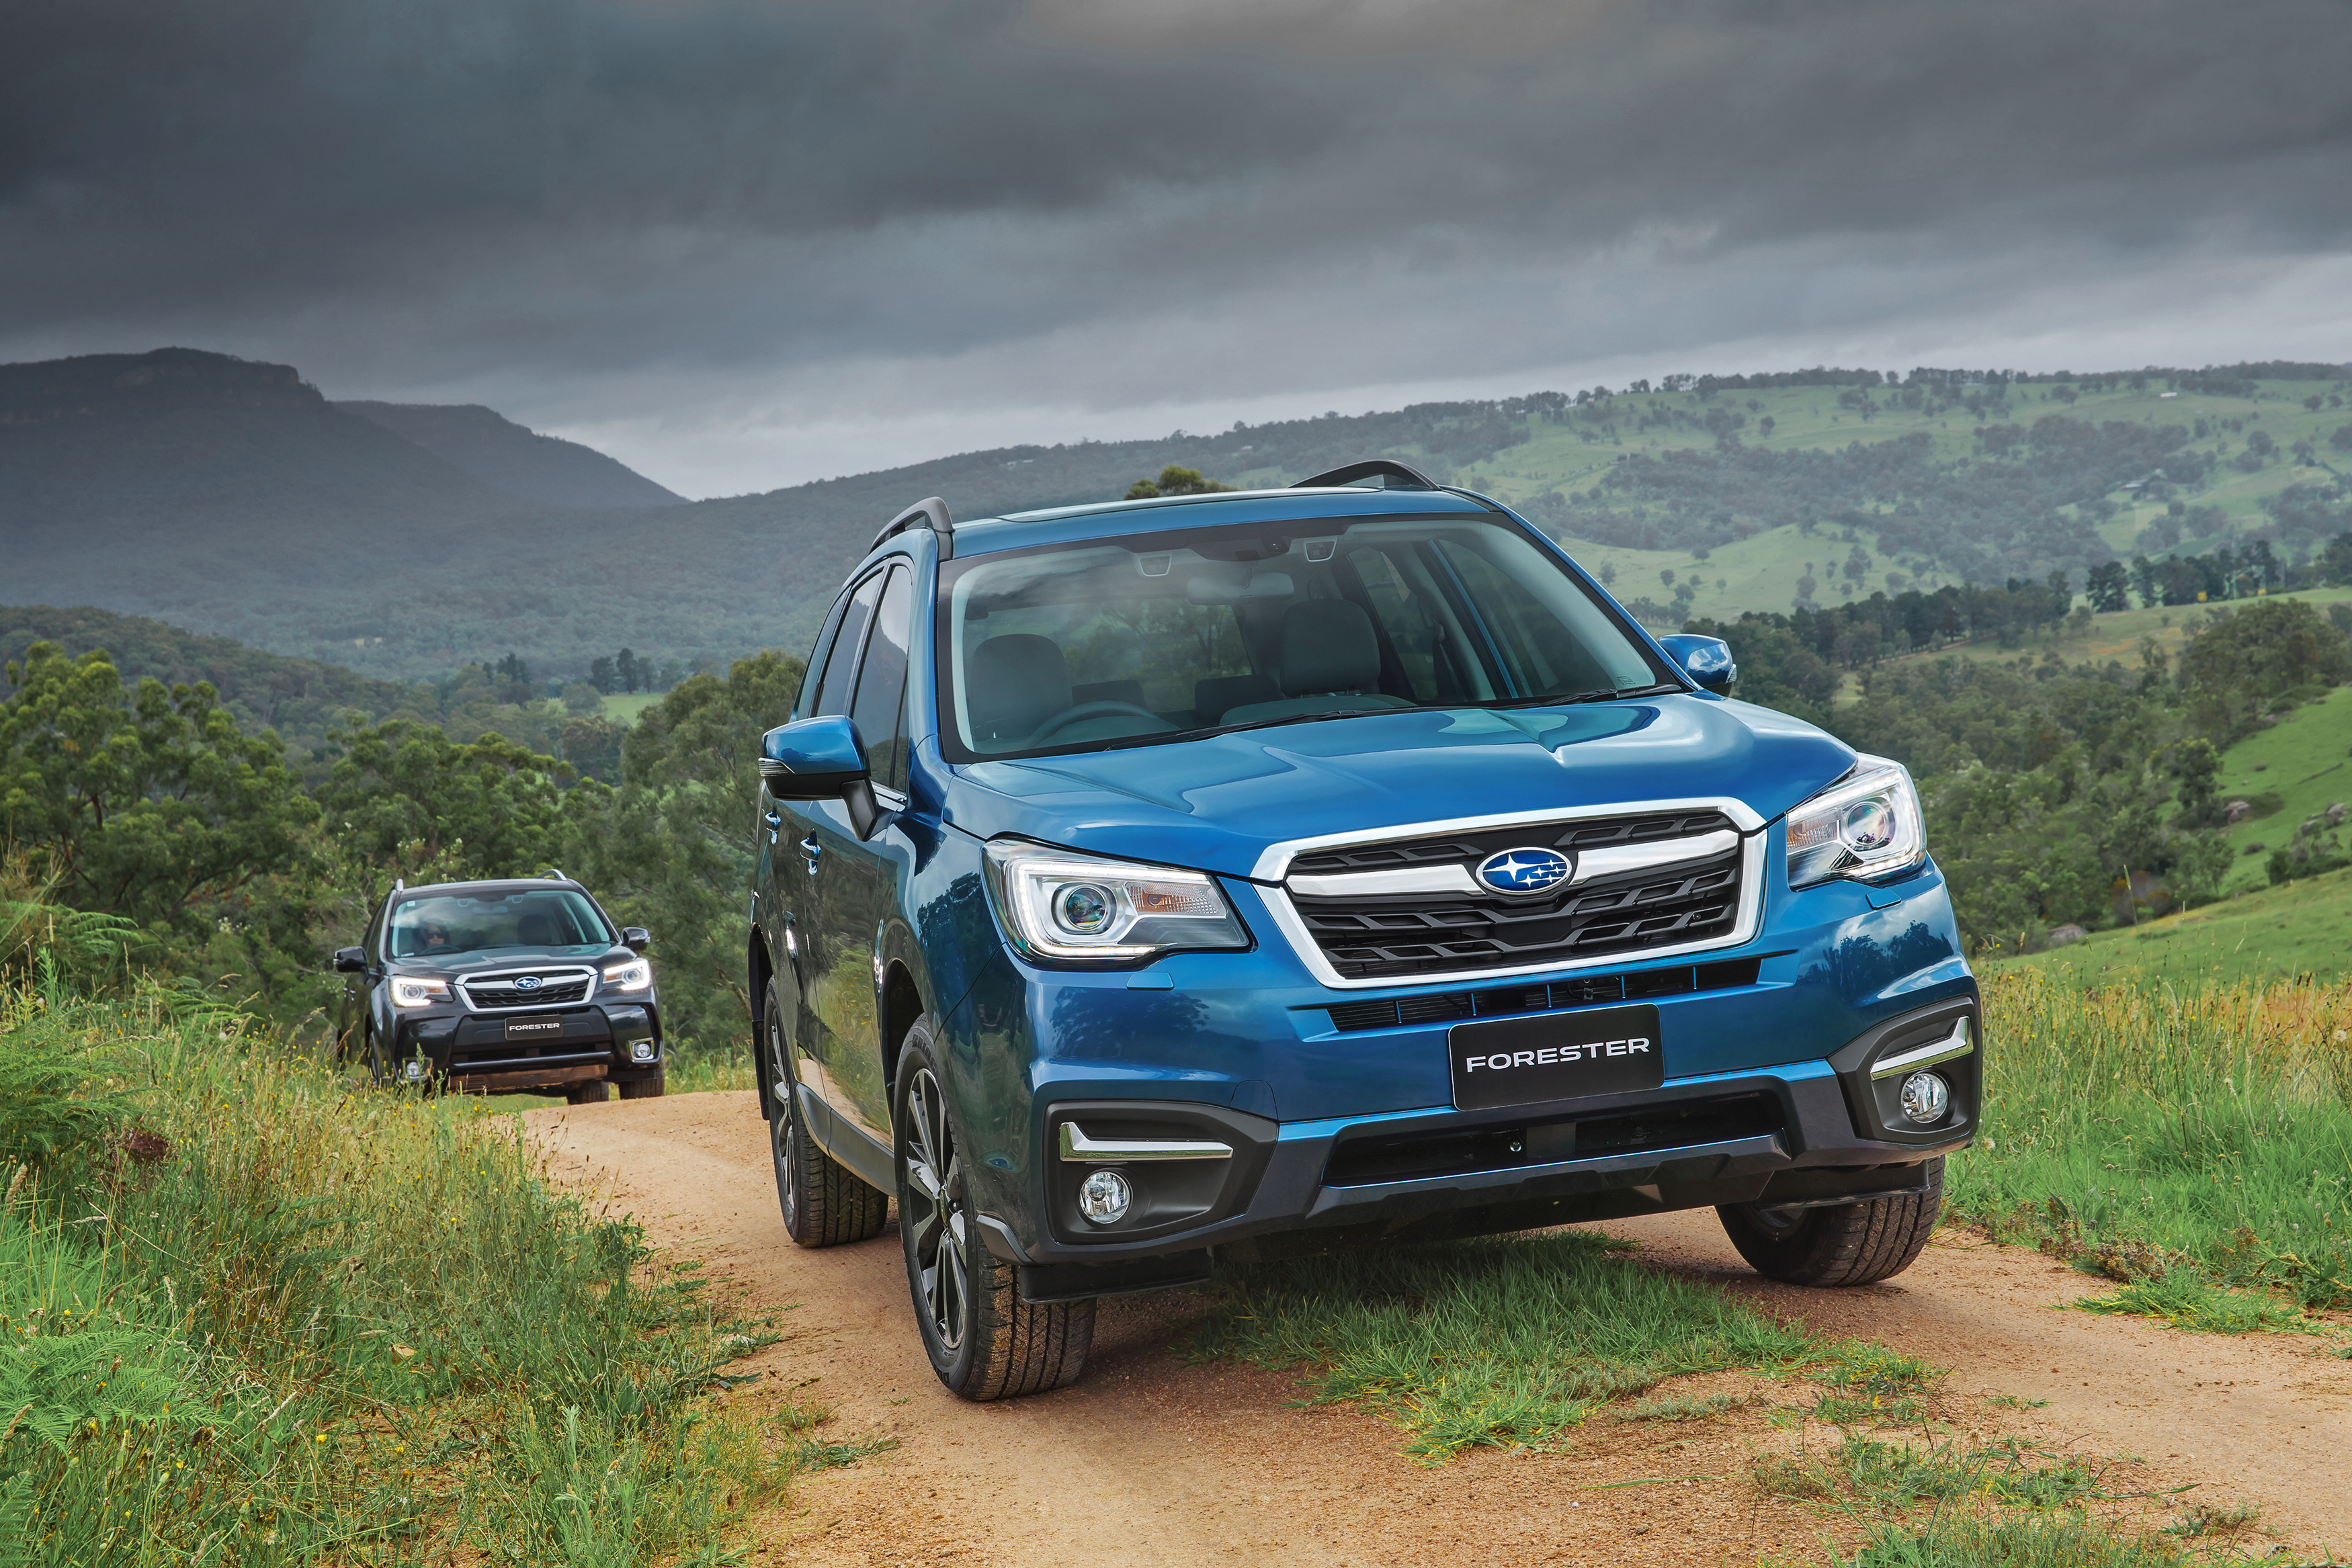 2016 Subaru Forester pricing and specifications photos